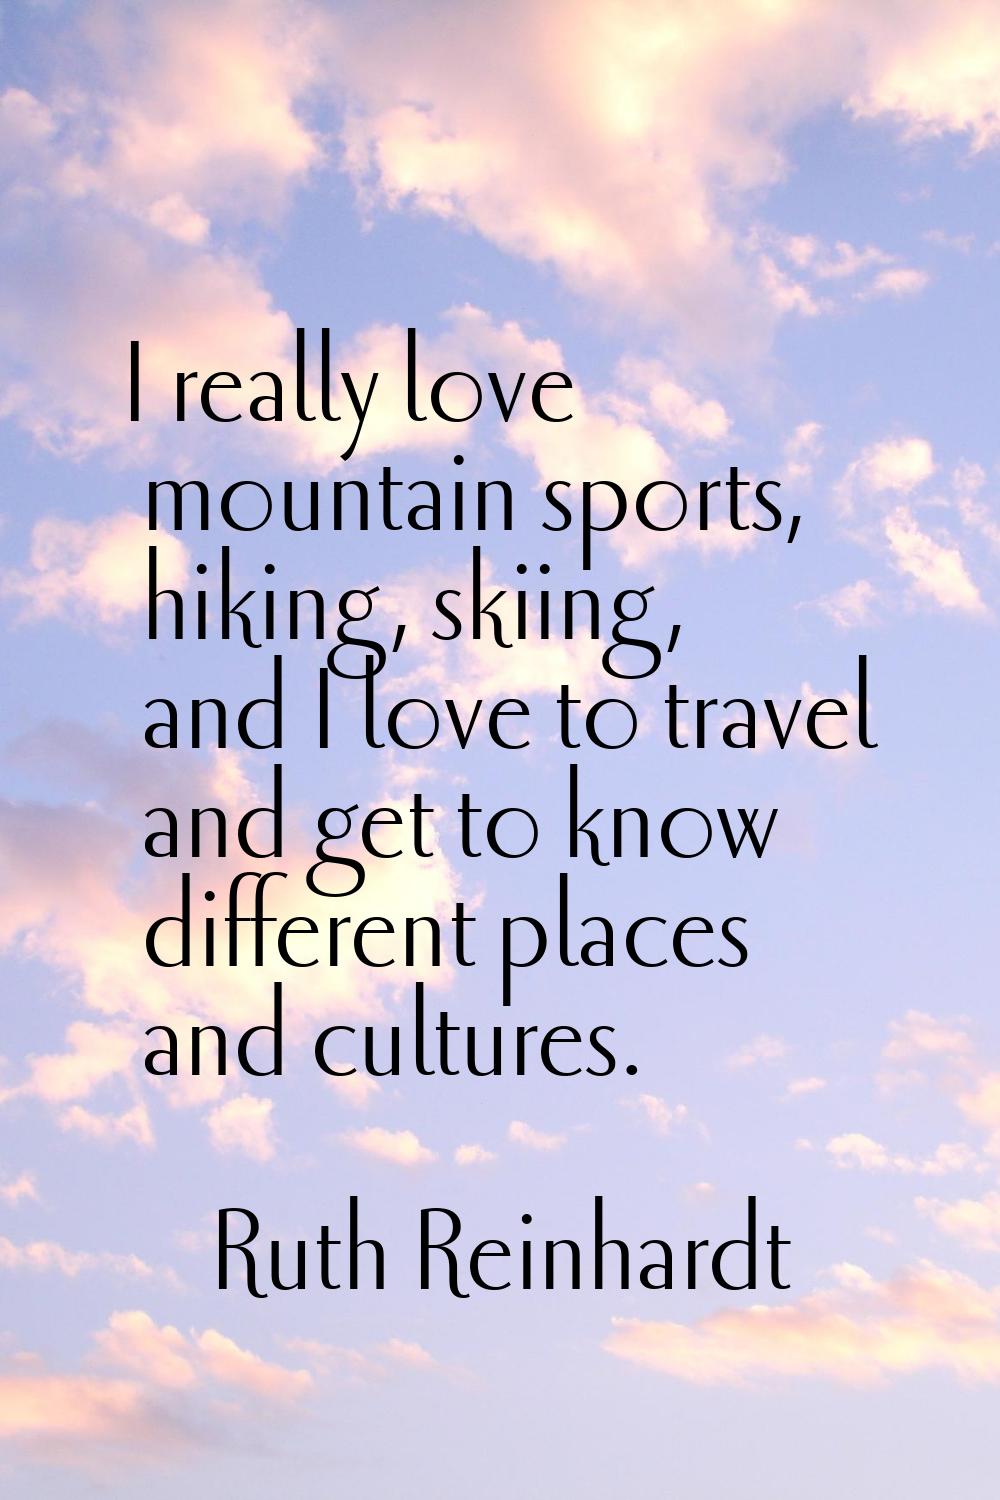 I really love mountain sports, hiking, skiing, and I love to travel and get to know different place